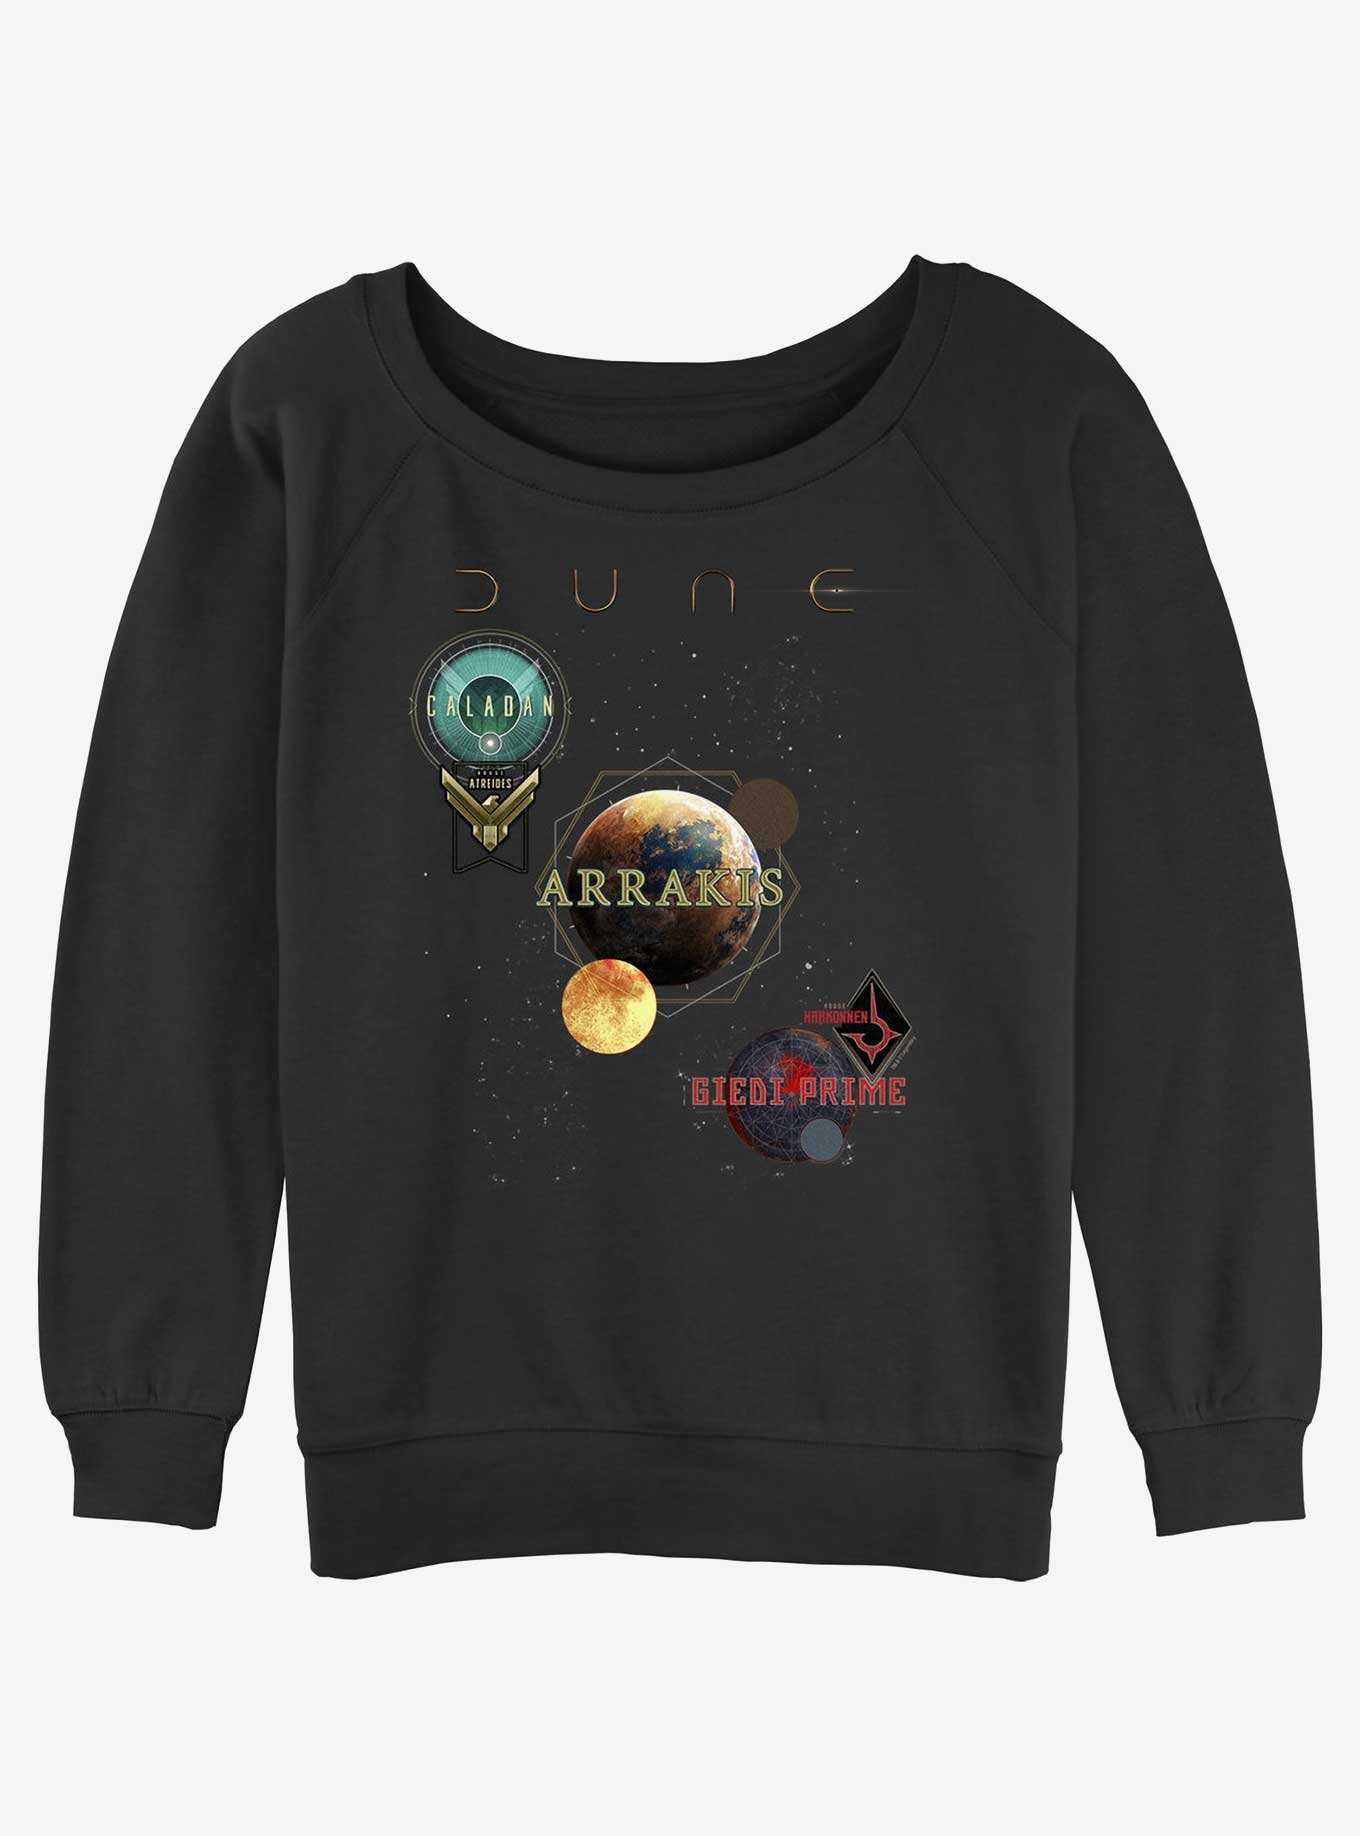 Dune: Part Two Planets Poster Girls Slouchy Sweatshirt, , hi-res